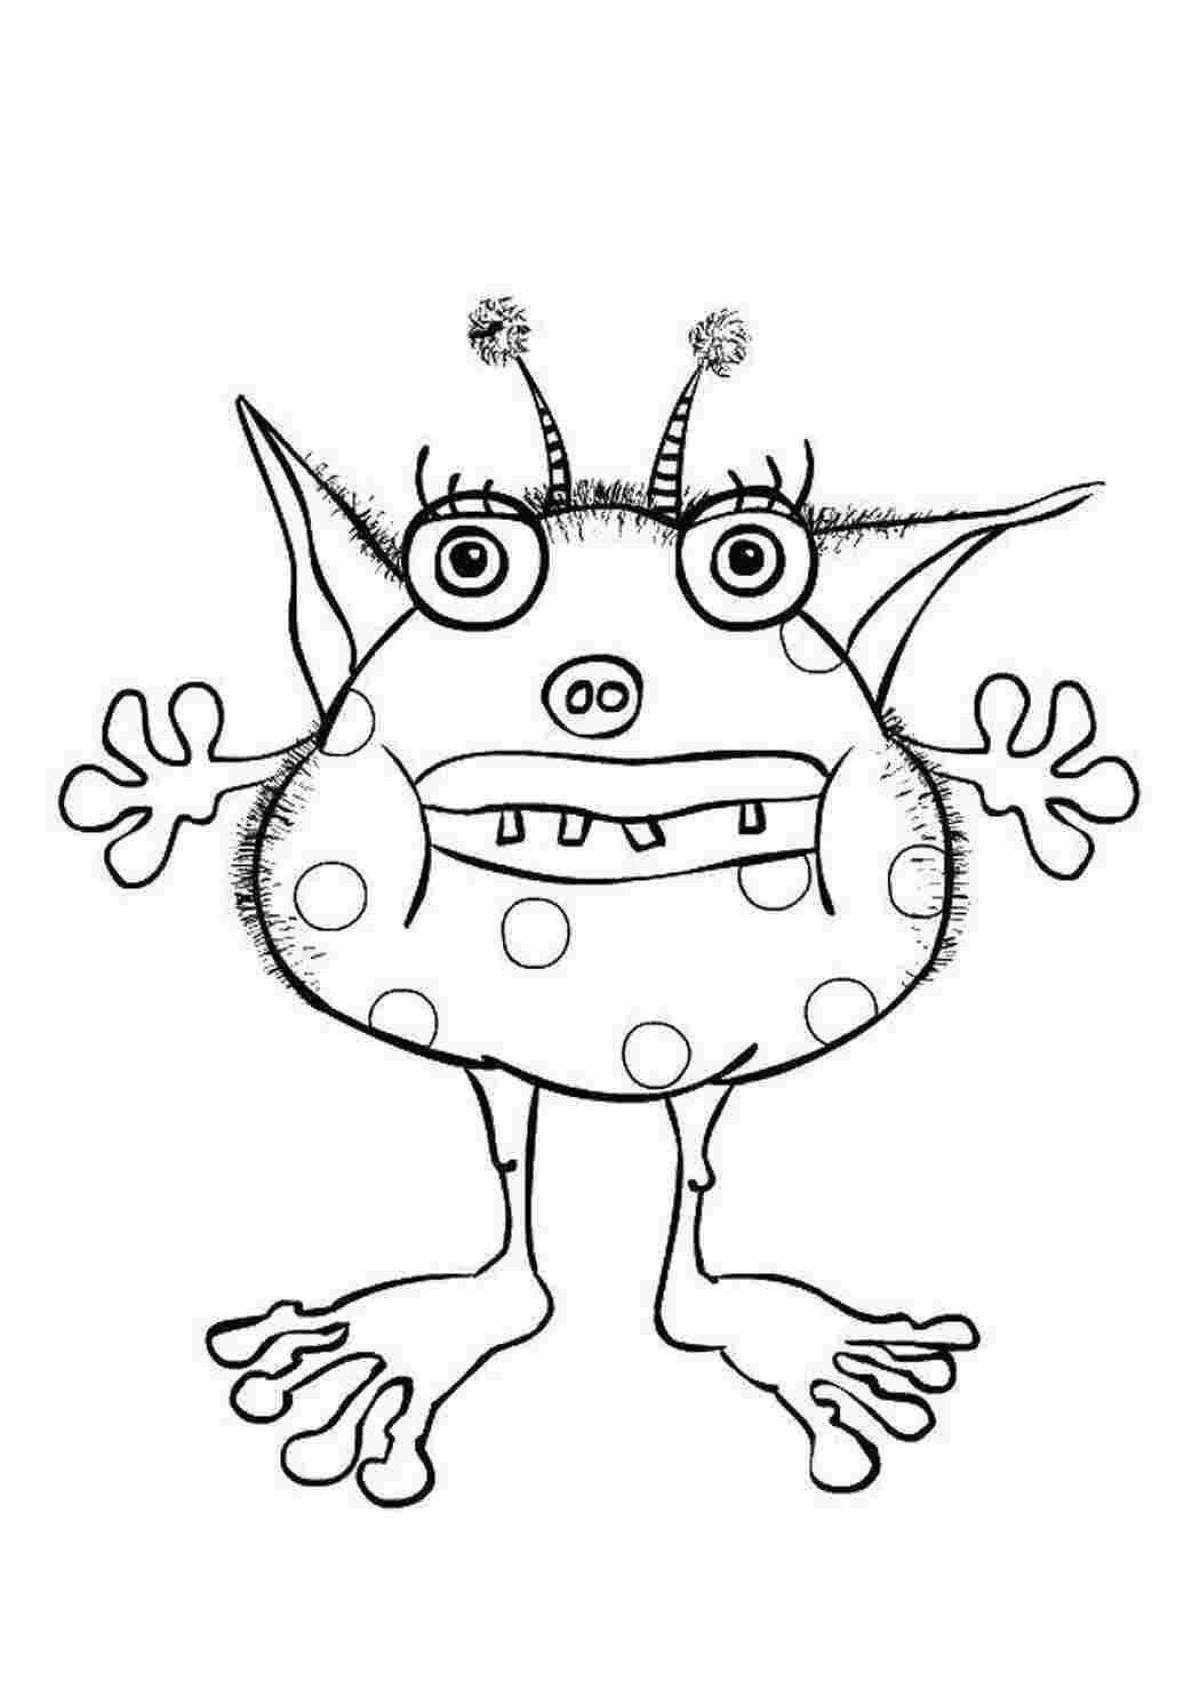 Coloring page enthusiastic musical monsters